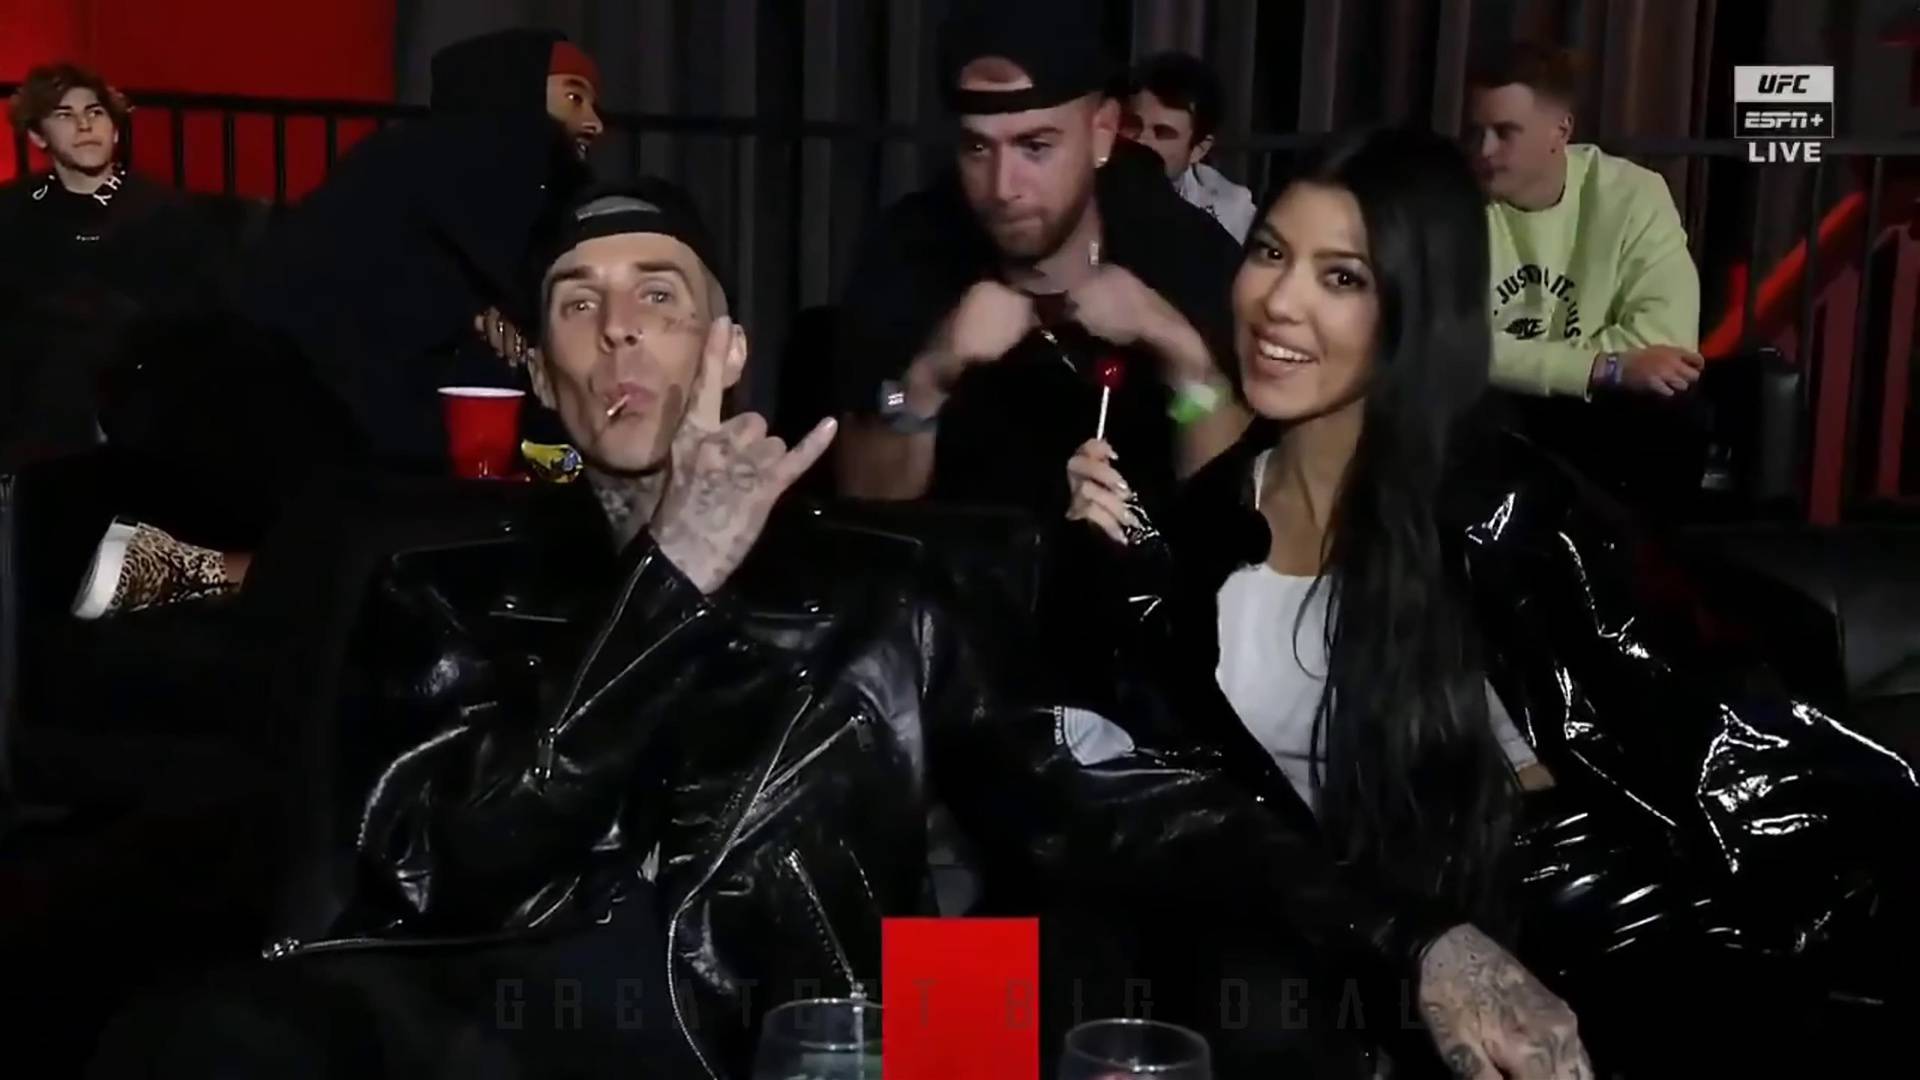 Travis Barker and Kourtney Kardashian along with Machine Gun Kelly and Megan Fox cage side for UFC 260